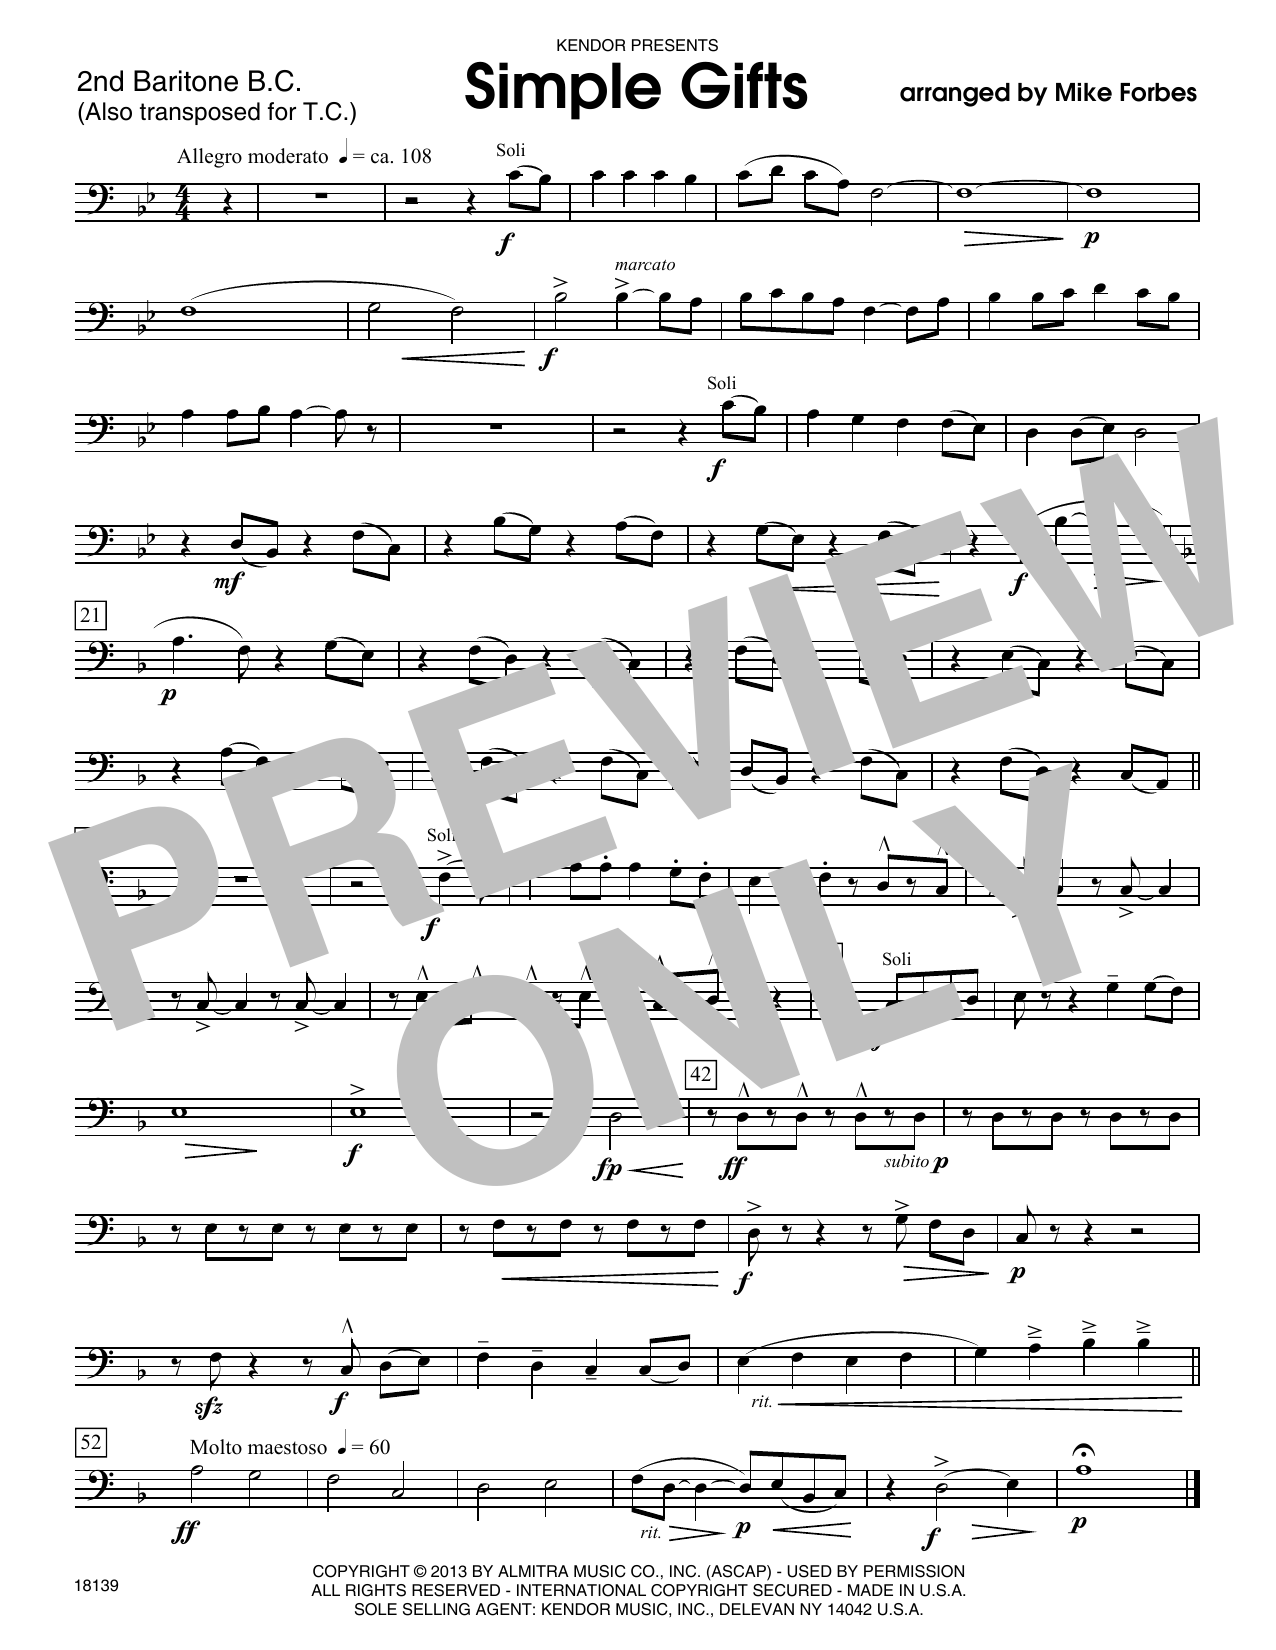 Download Mike Forbes Simple Gifts - 2nd Baritone B.C. Sheet Music